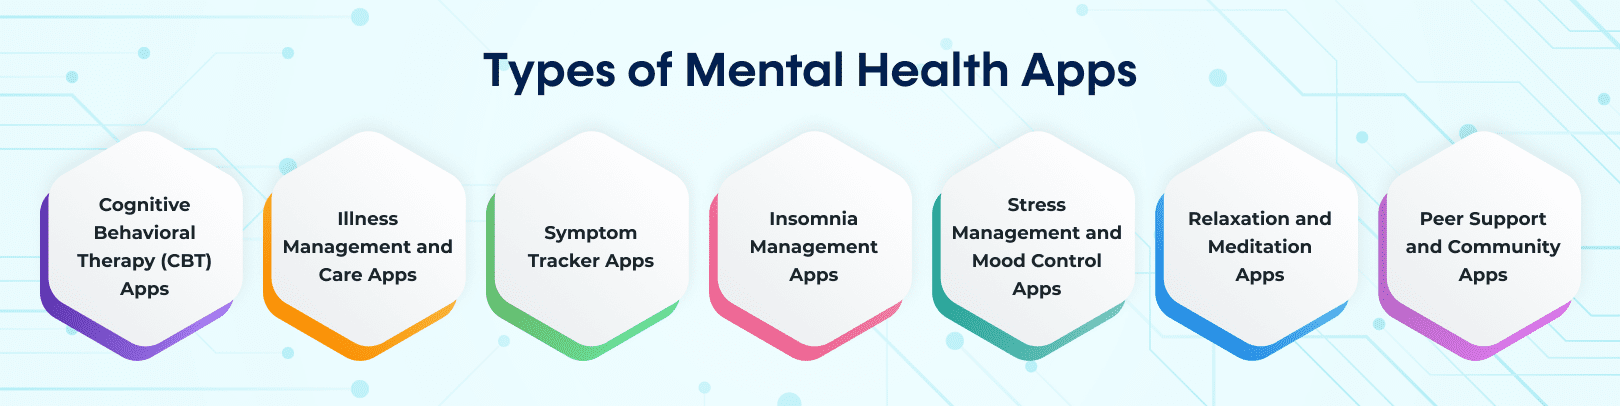 Types of Mental Health Apps